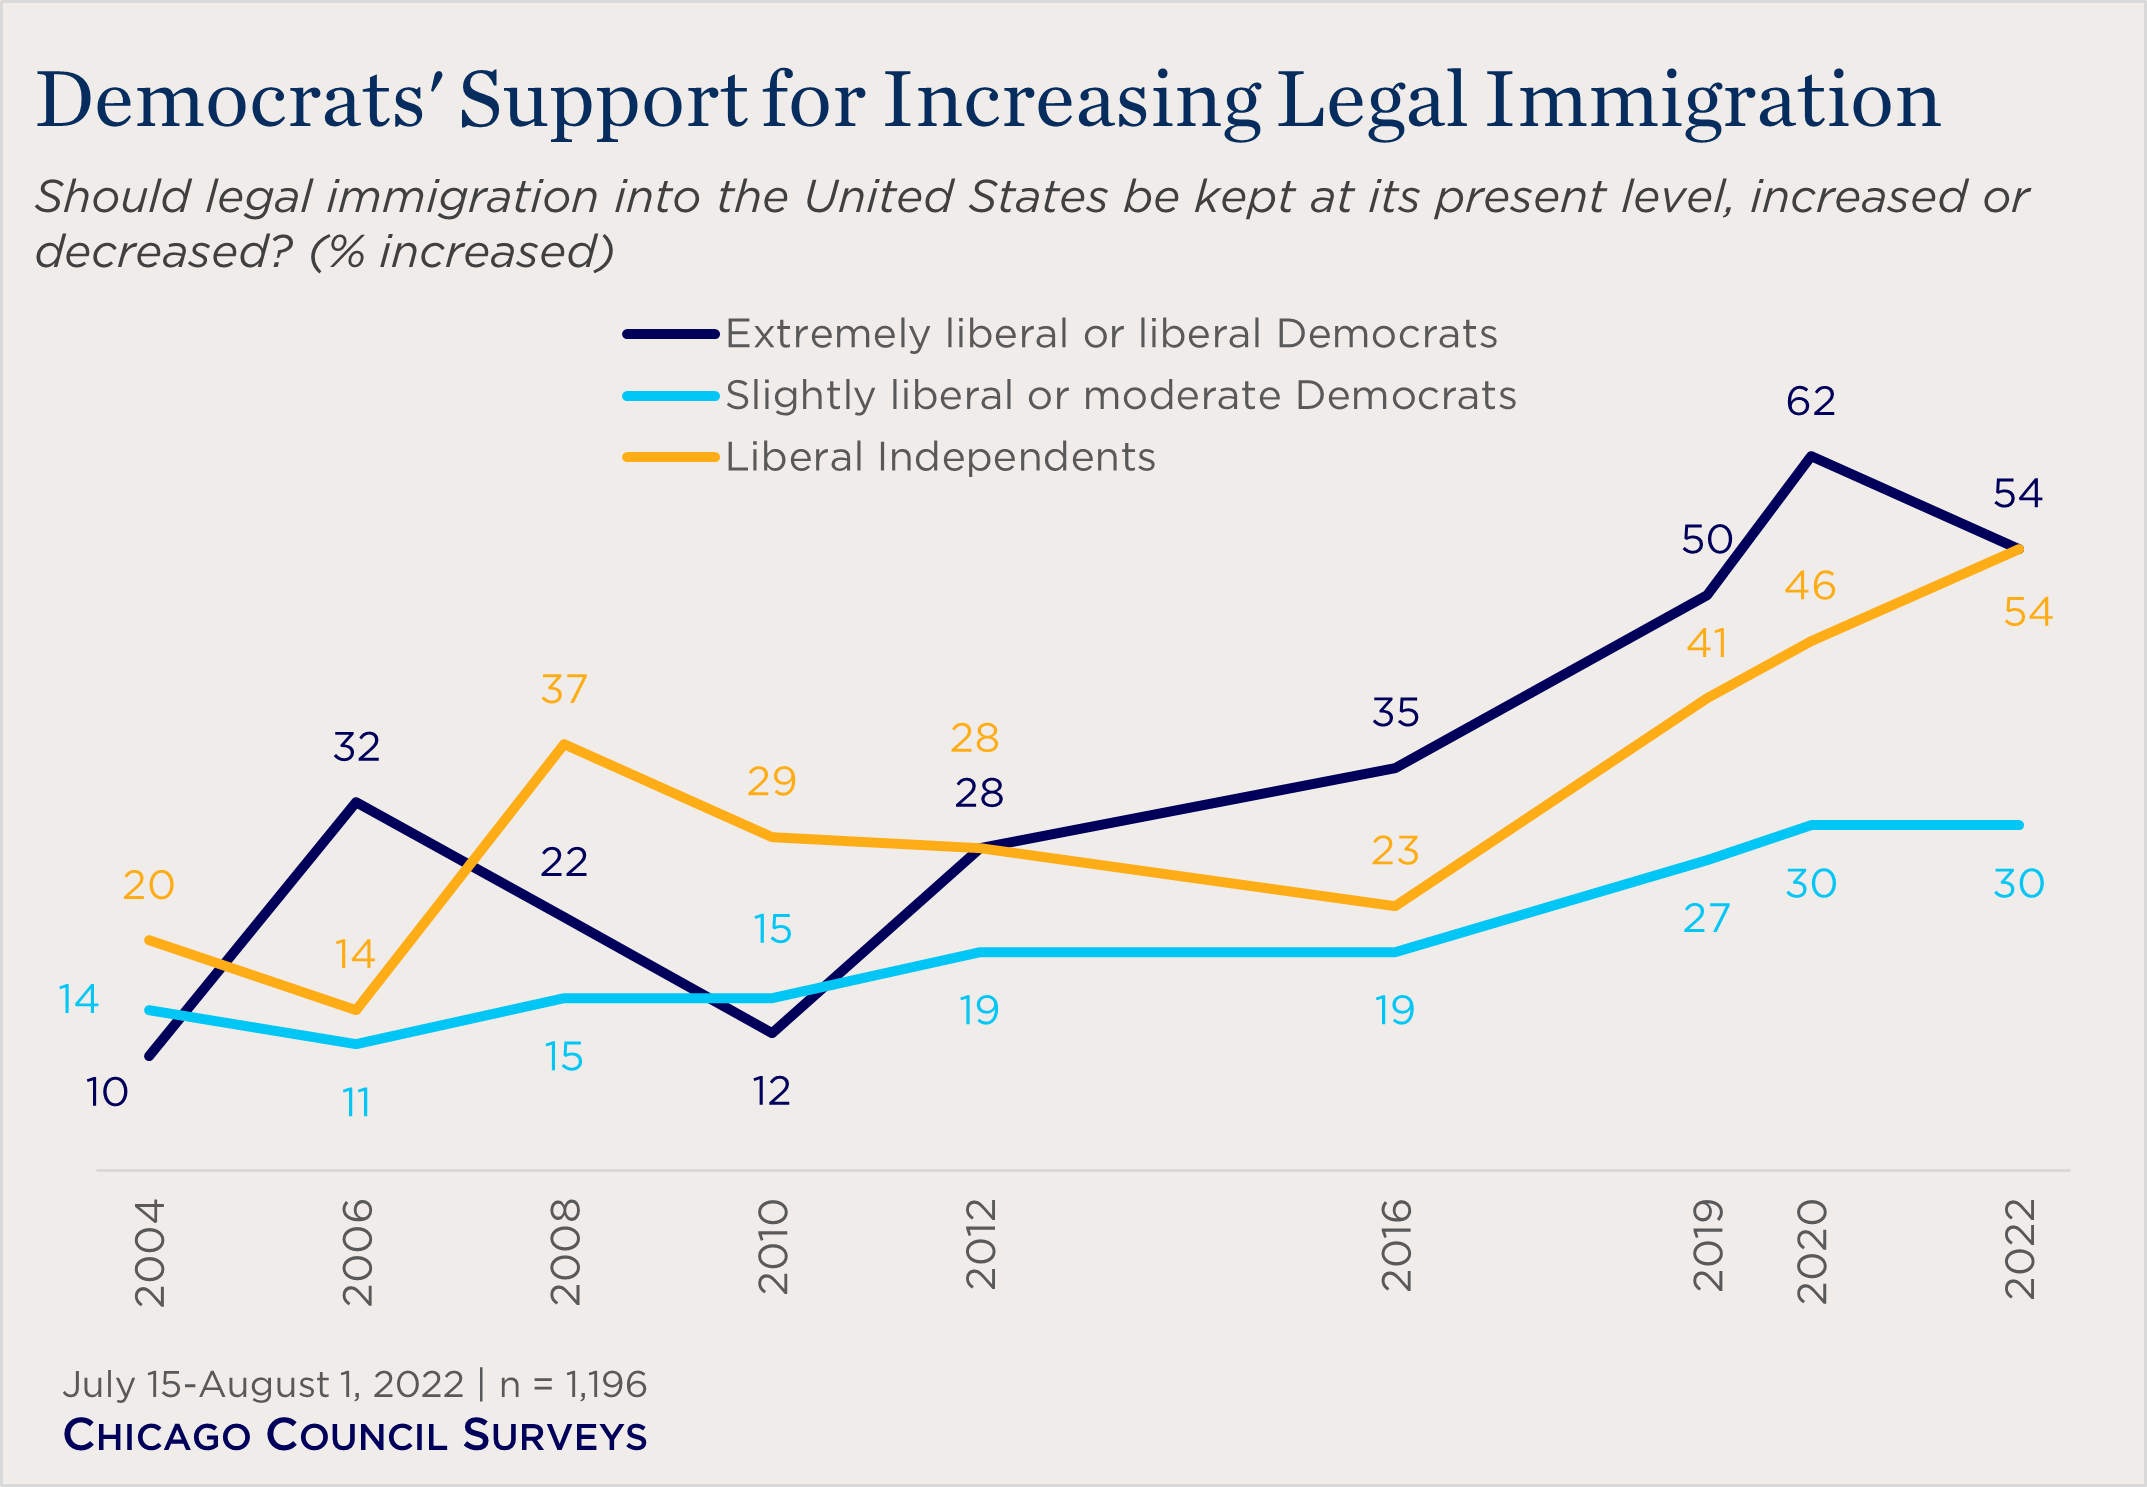 ""line chart showing ideological views of increasing legal immigration""